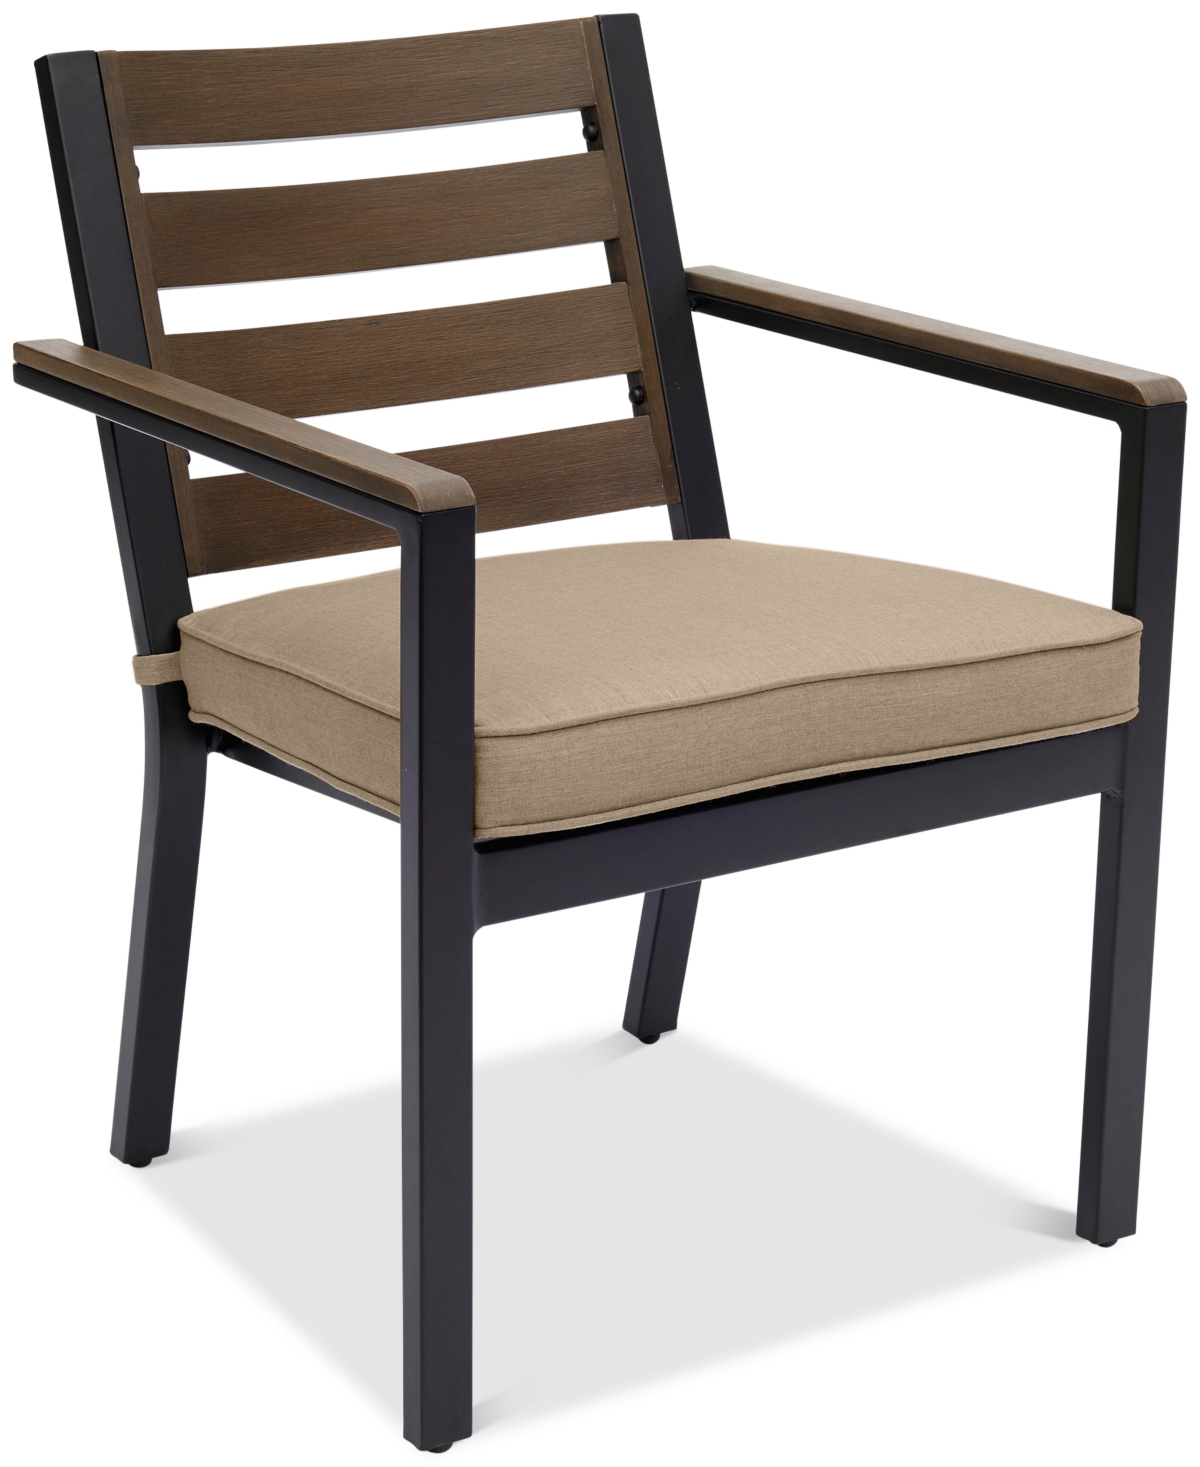 Agio Set Of 6 Stockholm Outdoor Dining Chairs, Created For Macy's In Outdura Remy Pebble